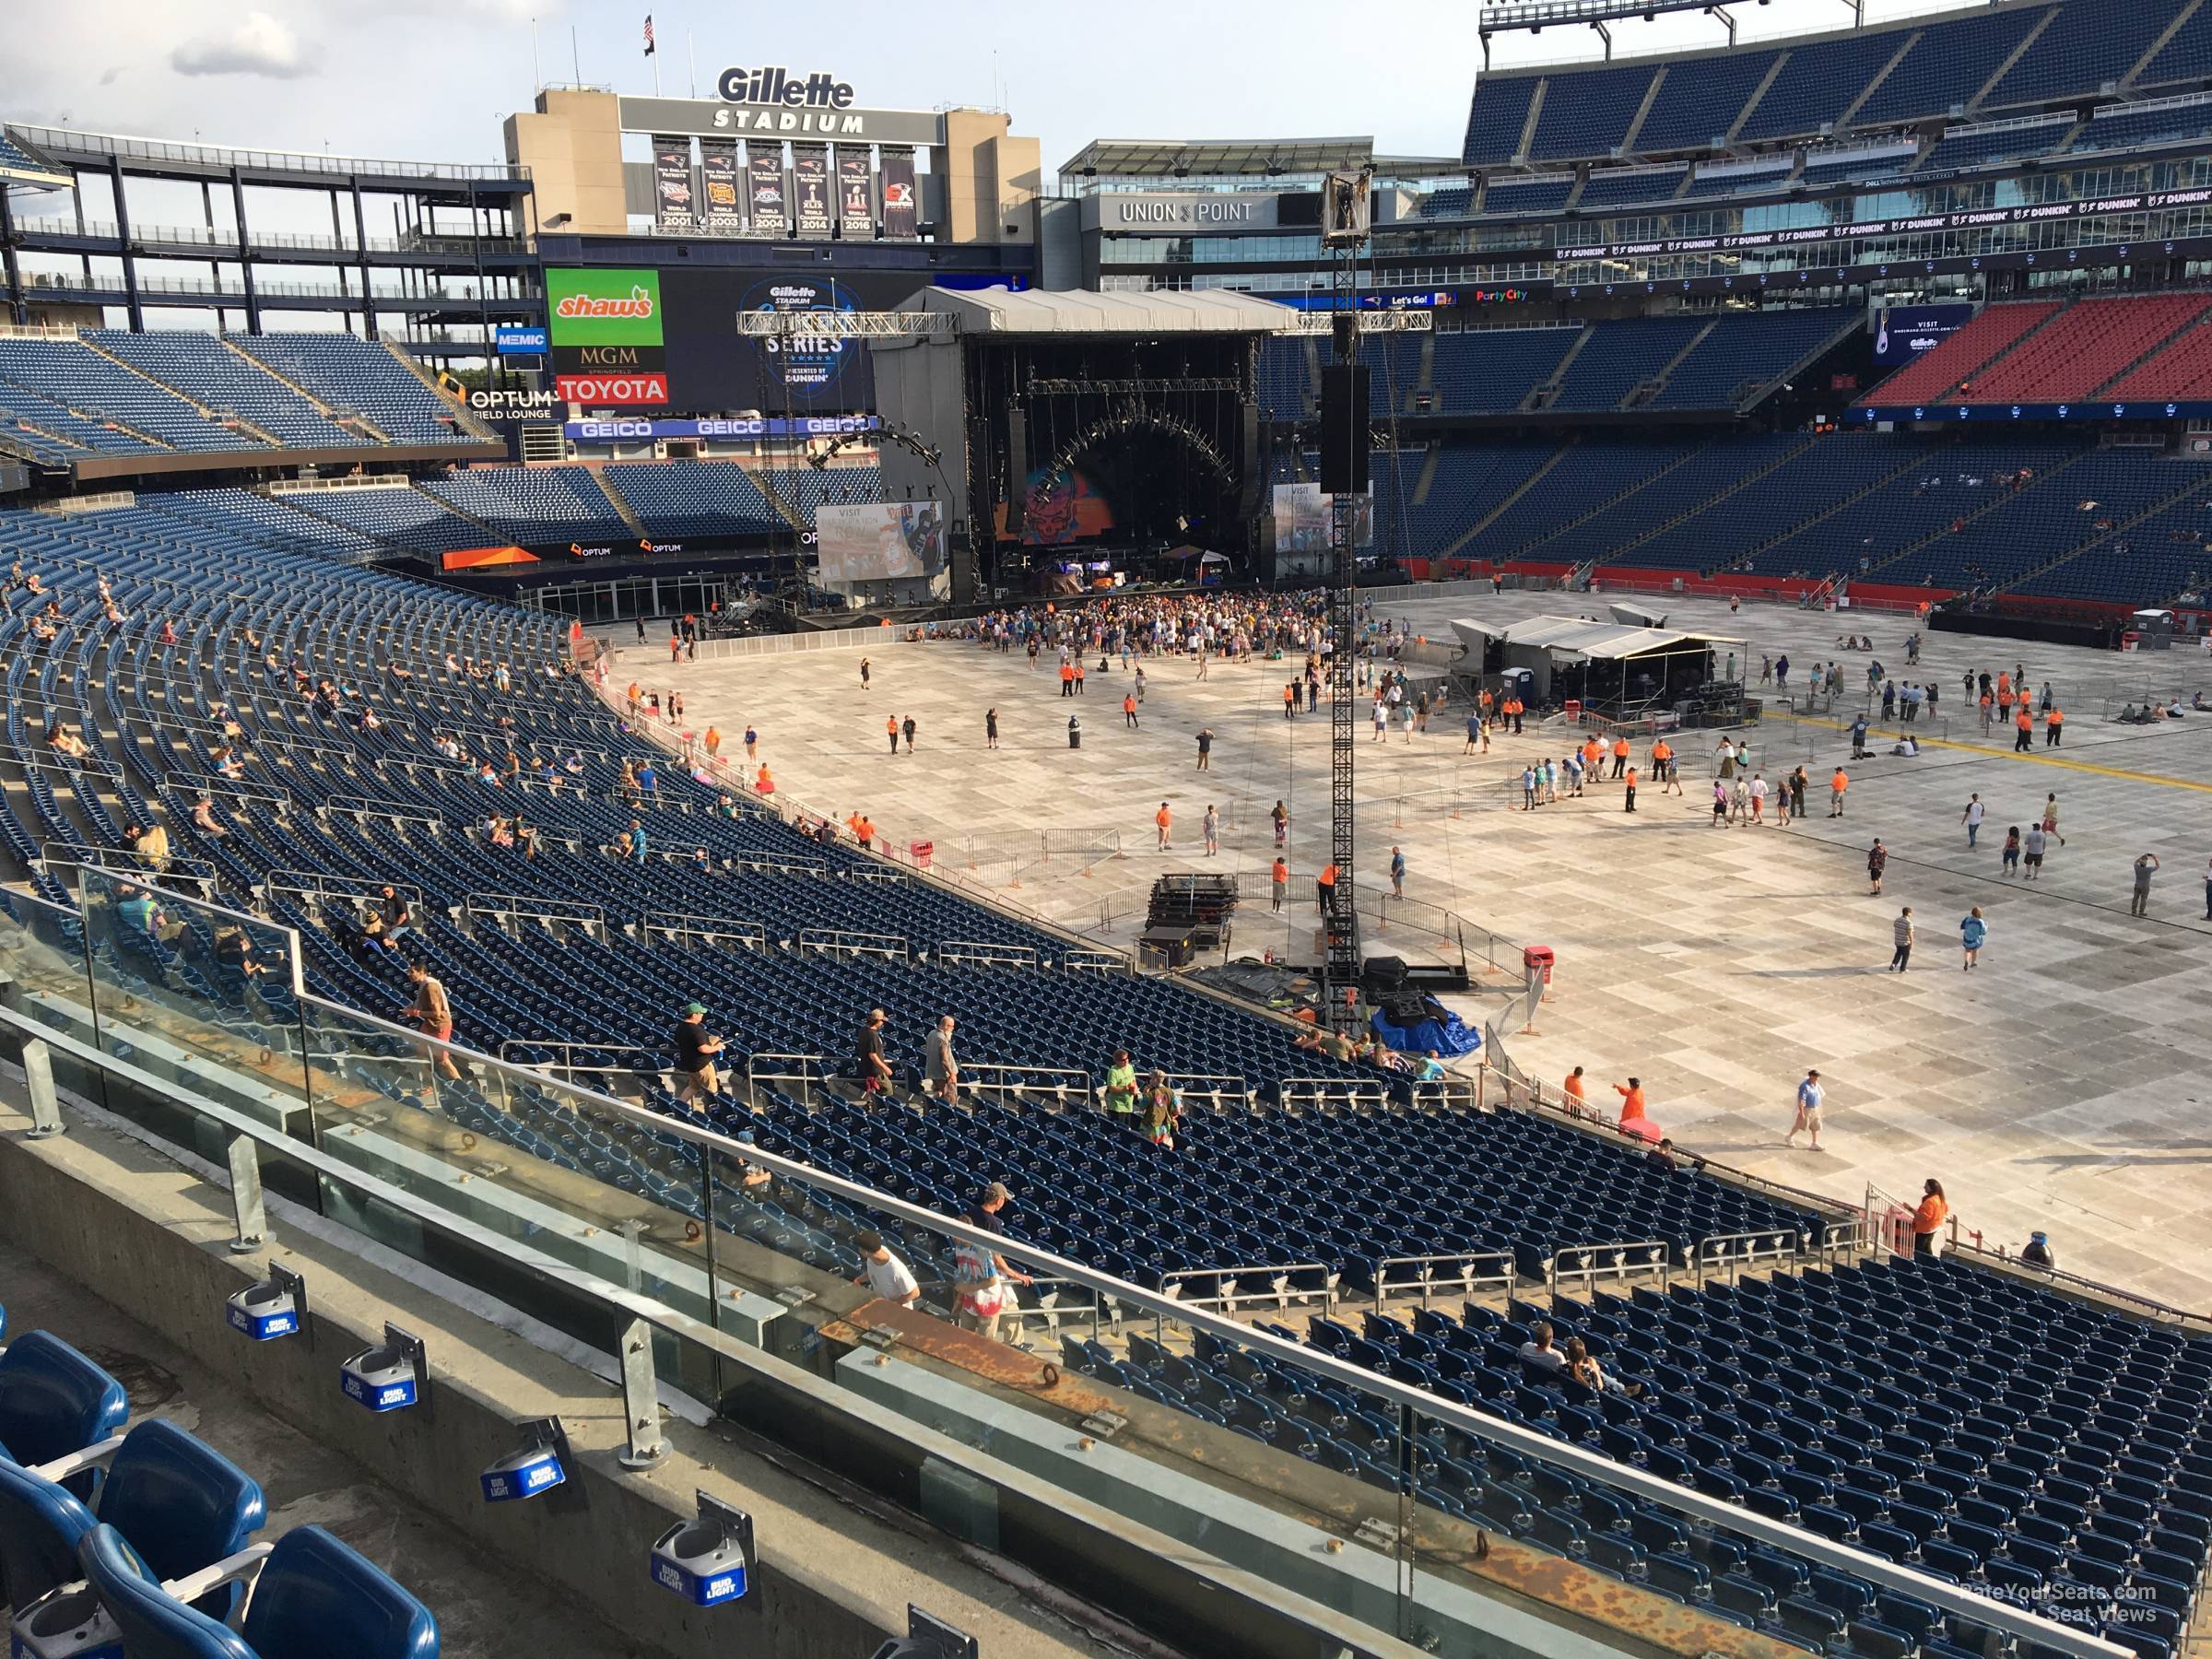 Gillette Stadium Section 204 Concert Seating - RateYourSeats.com